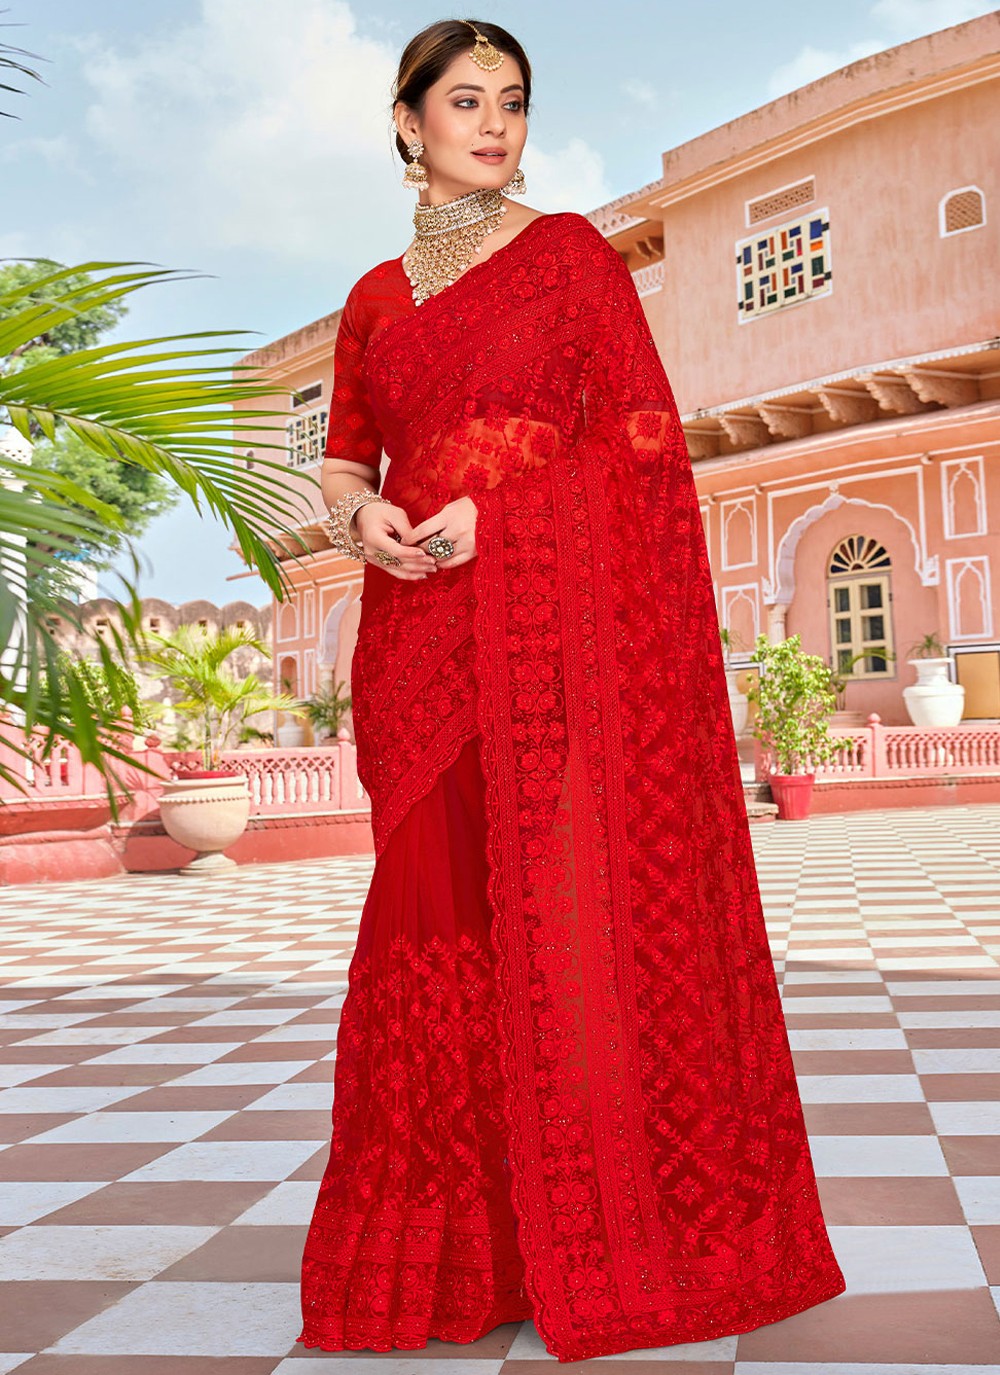 Discover more than 155 red saree makeup and hairstyle